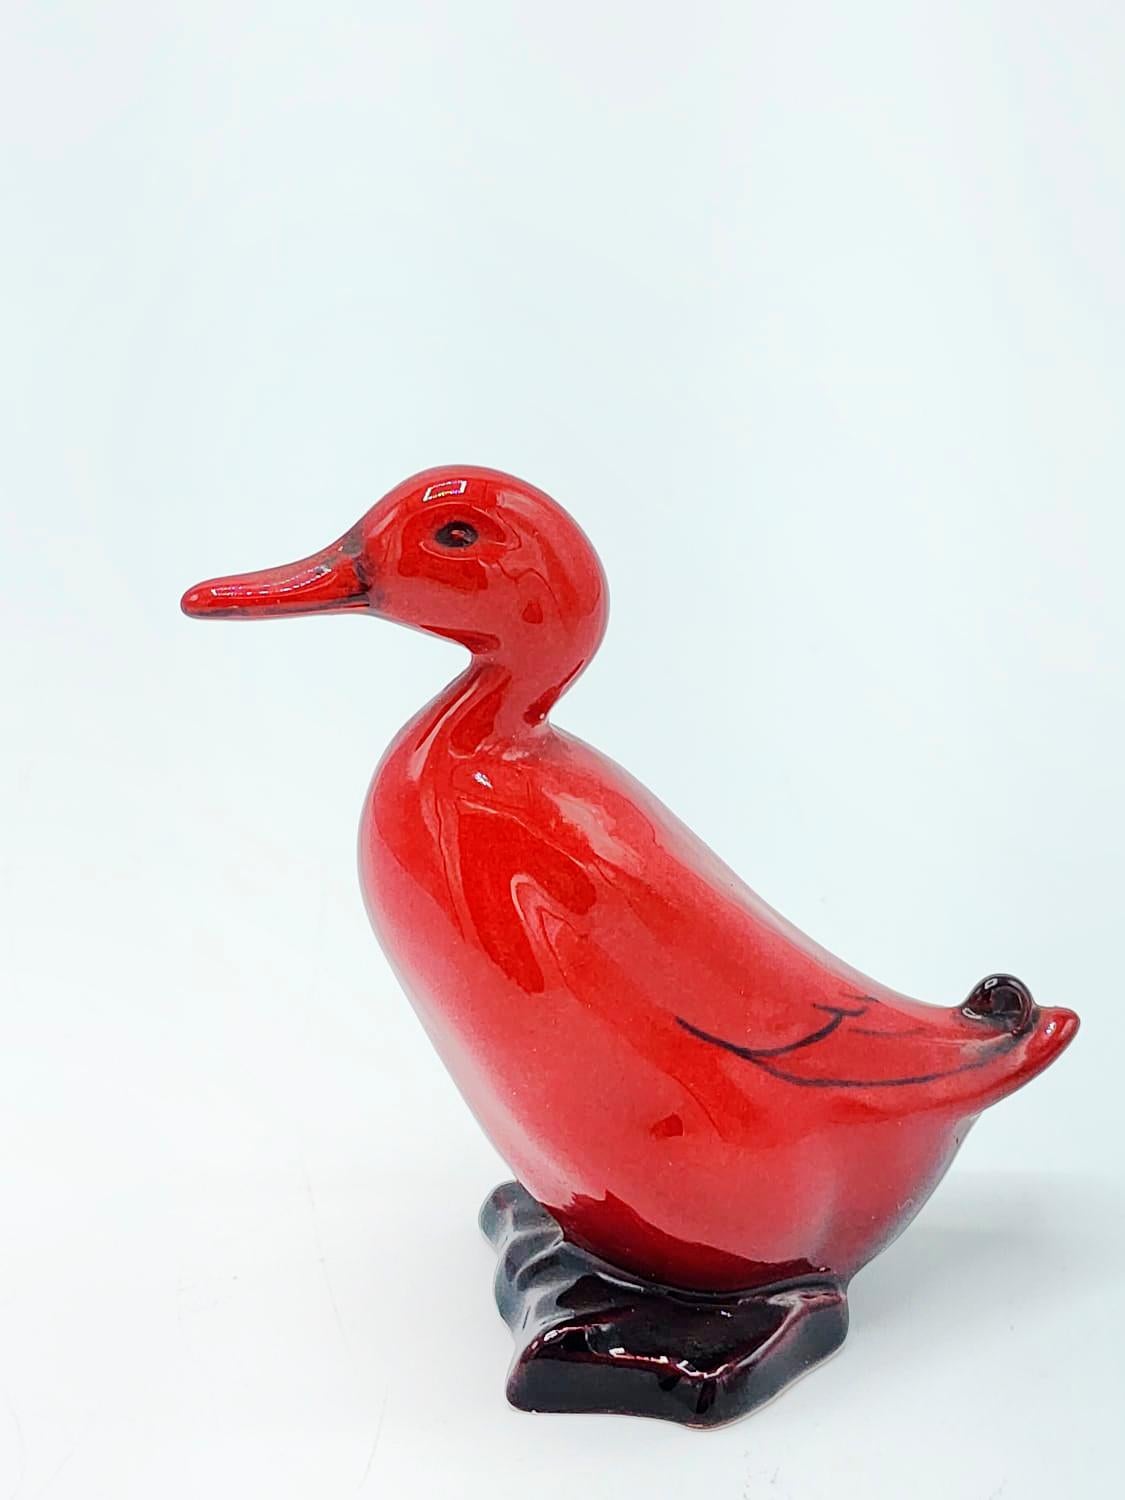 Royal Doulton Porcelain Figure made in England.
Duck Figure in Red and Black Flambe
Measures:
Height: 6 centimeters
Length: 5.5 centimeters
Depth: 2.5 centimeters